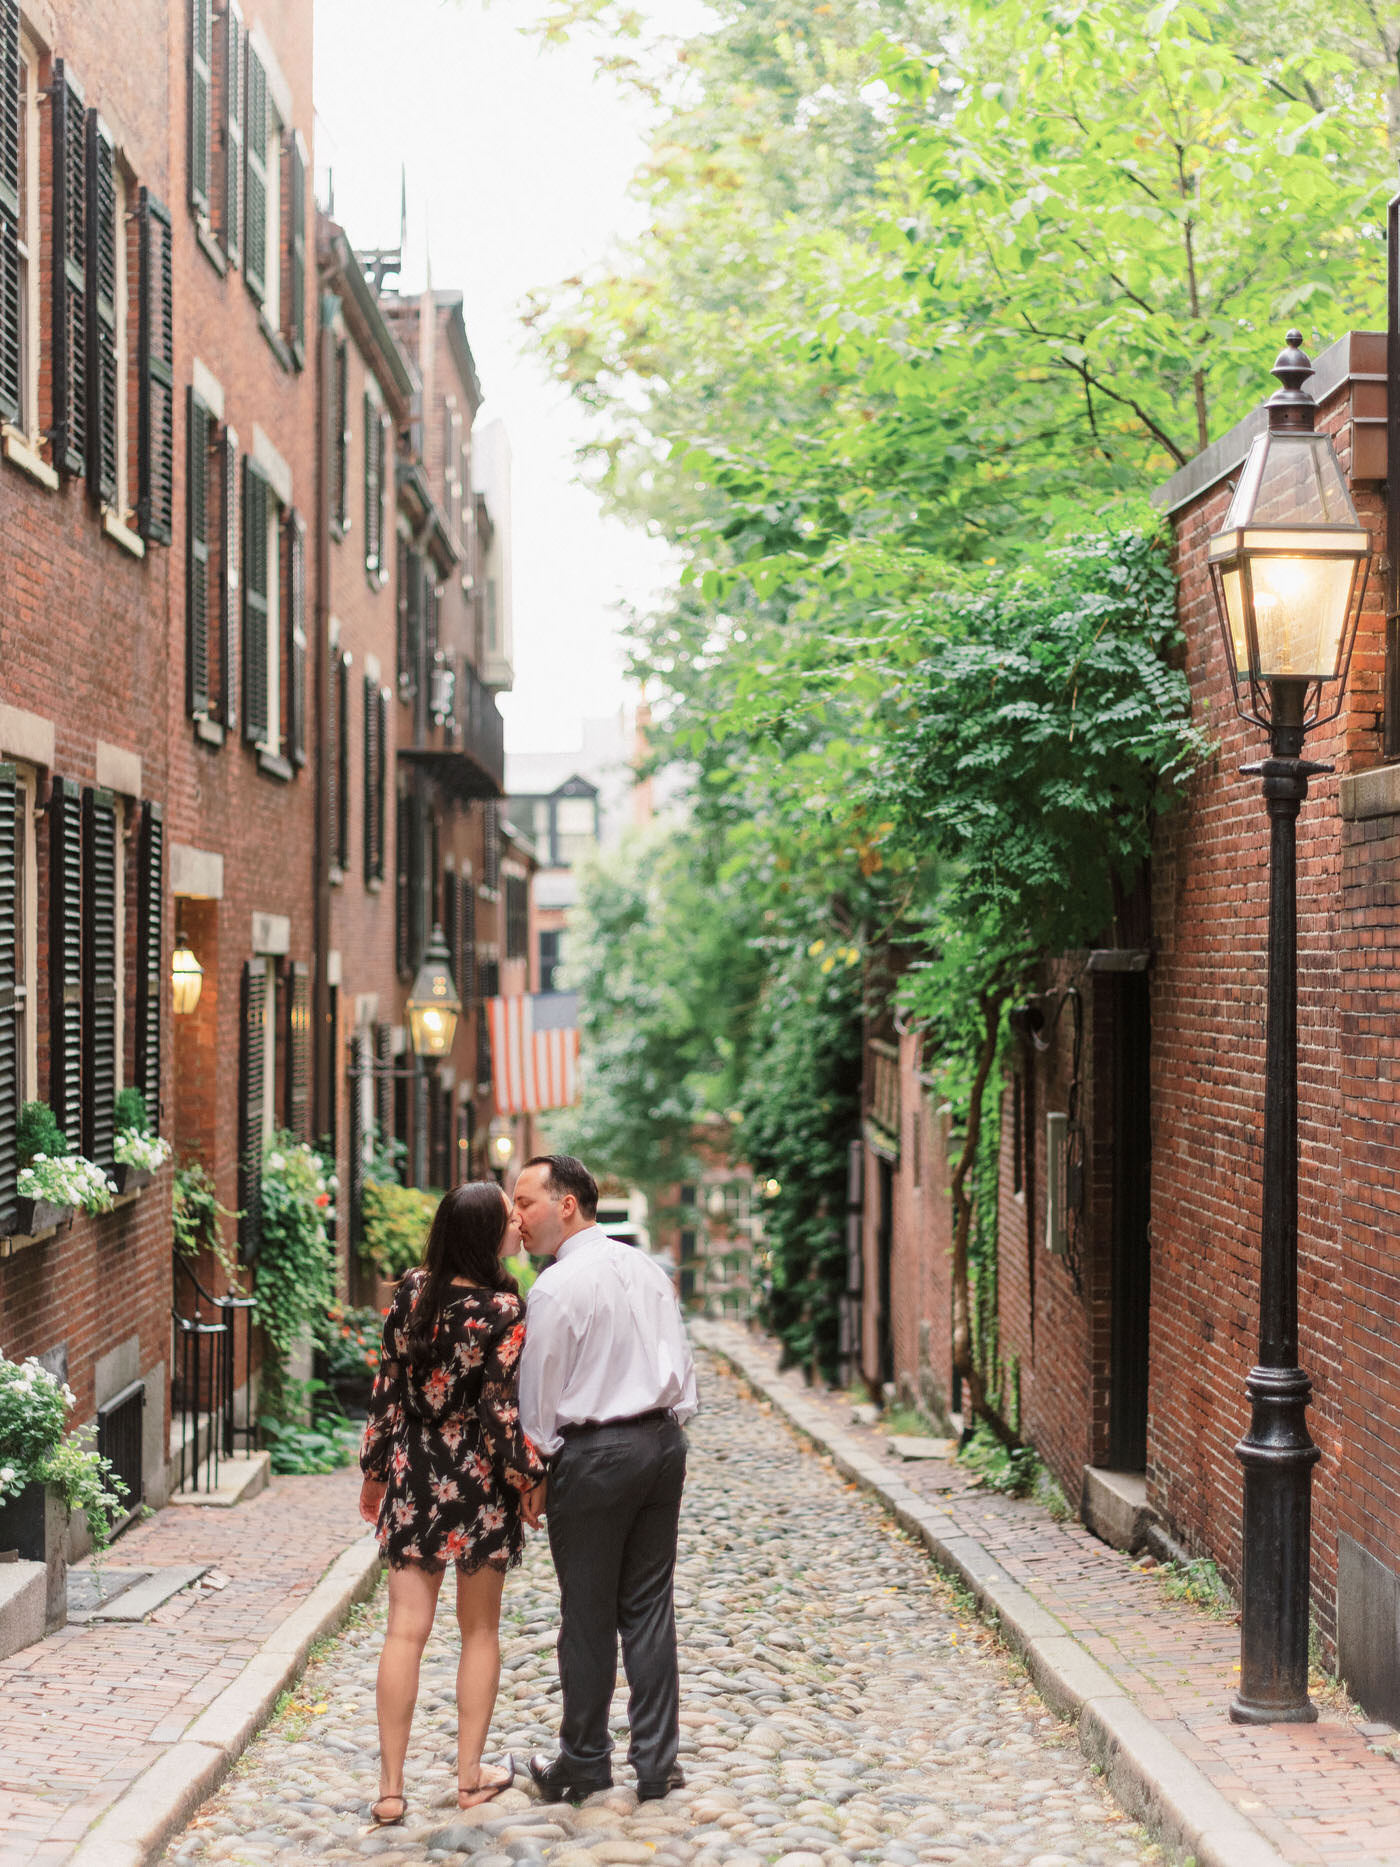 086-engagement-session-in-historic-beacon-hill-boston-by-top-fine-art-photographer.jpg